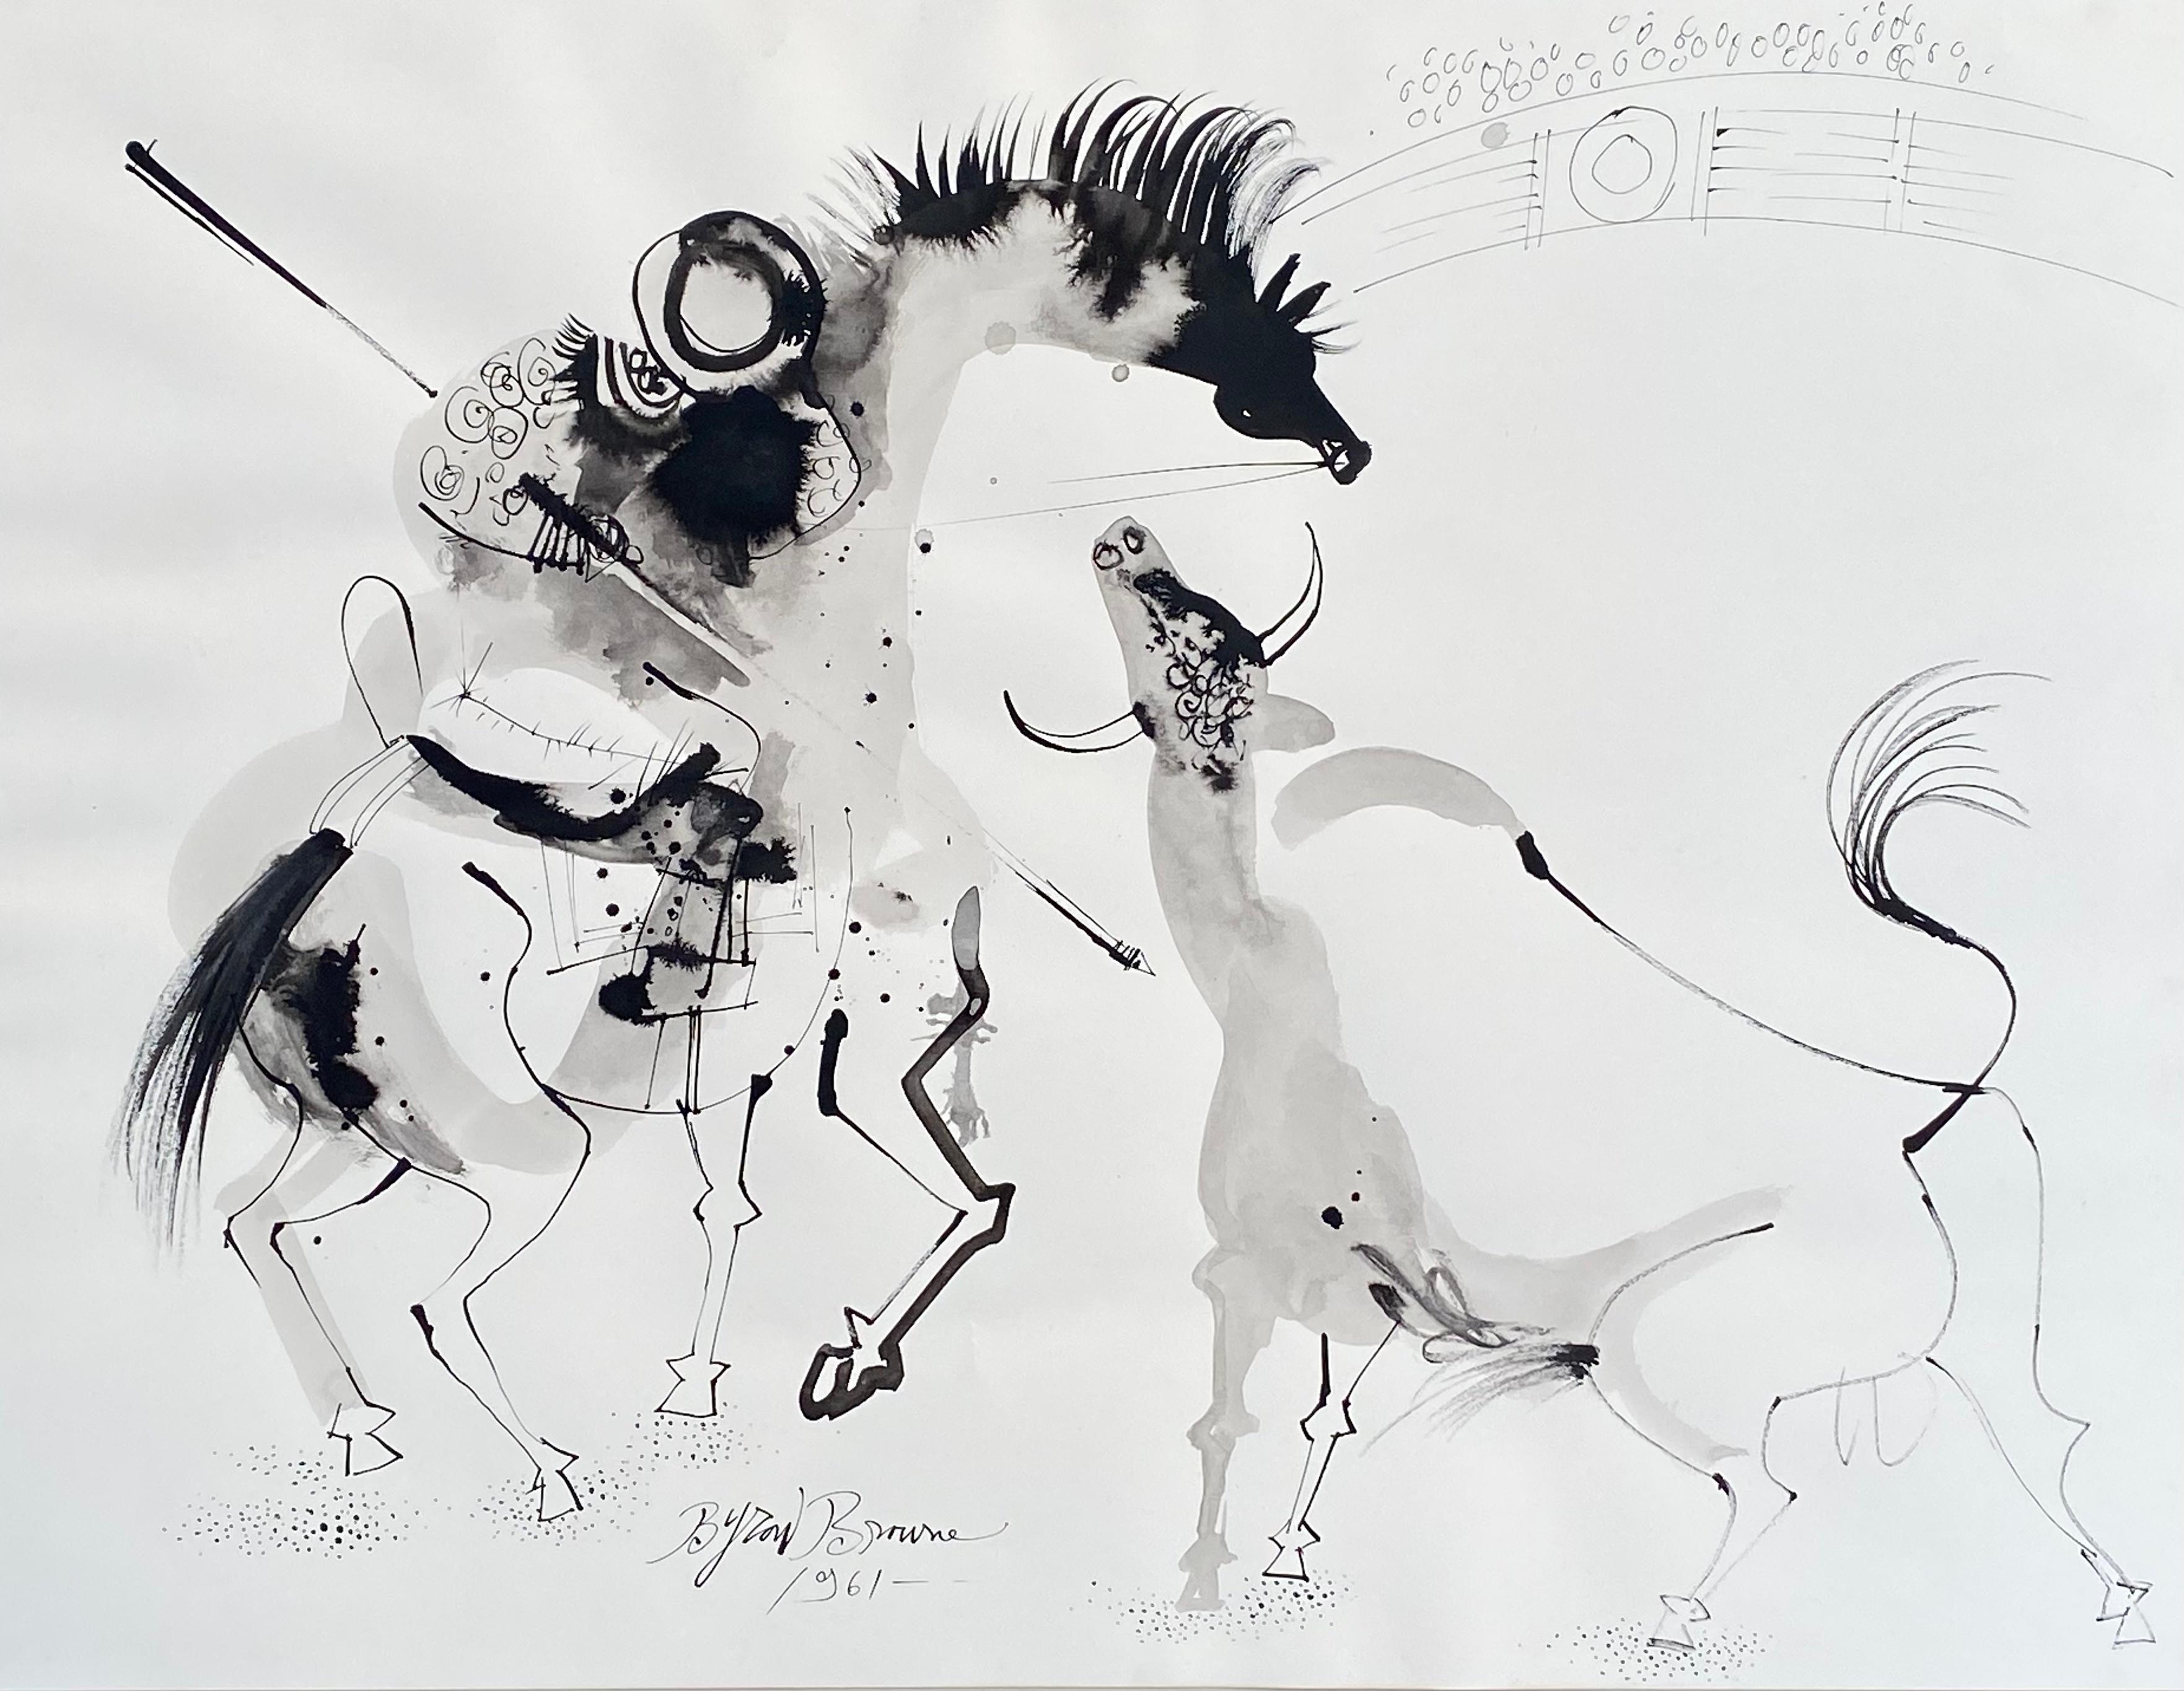 “Picador and the Bull” - Post-Modern Mixed Media Art by Byron Browne